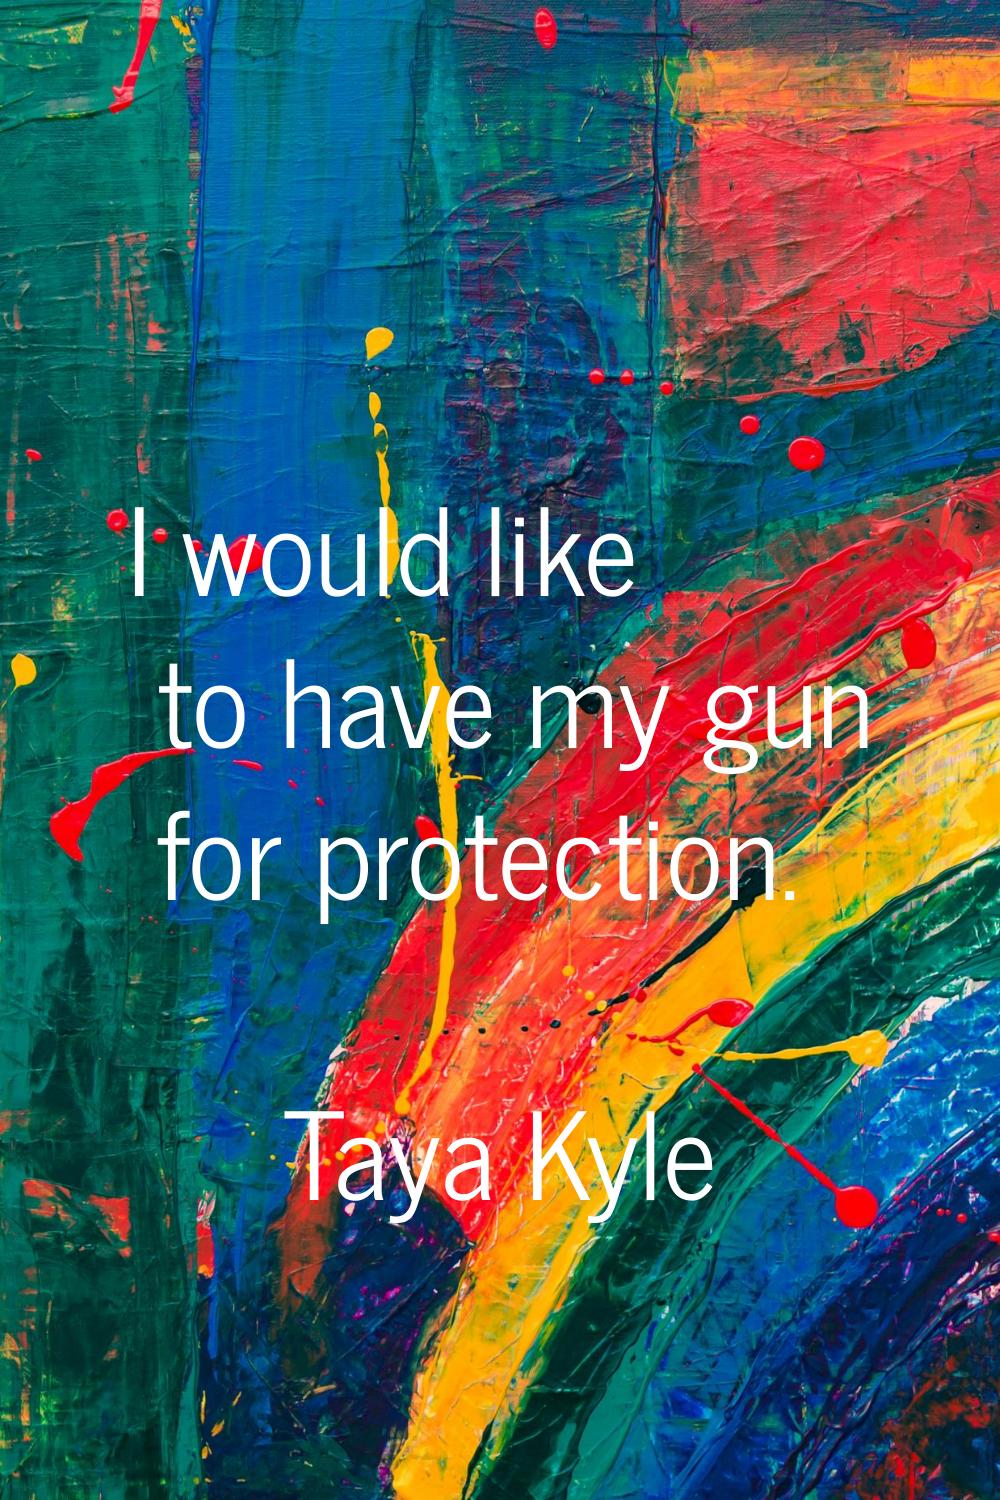 I would like to have my gun for protection.